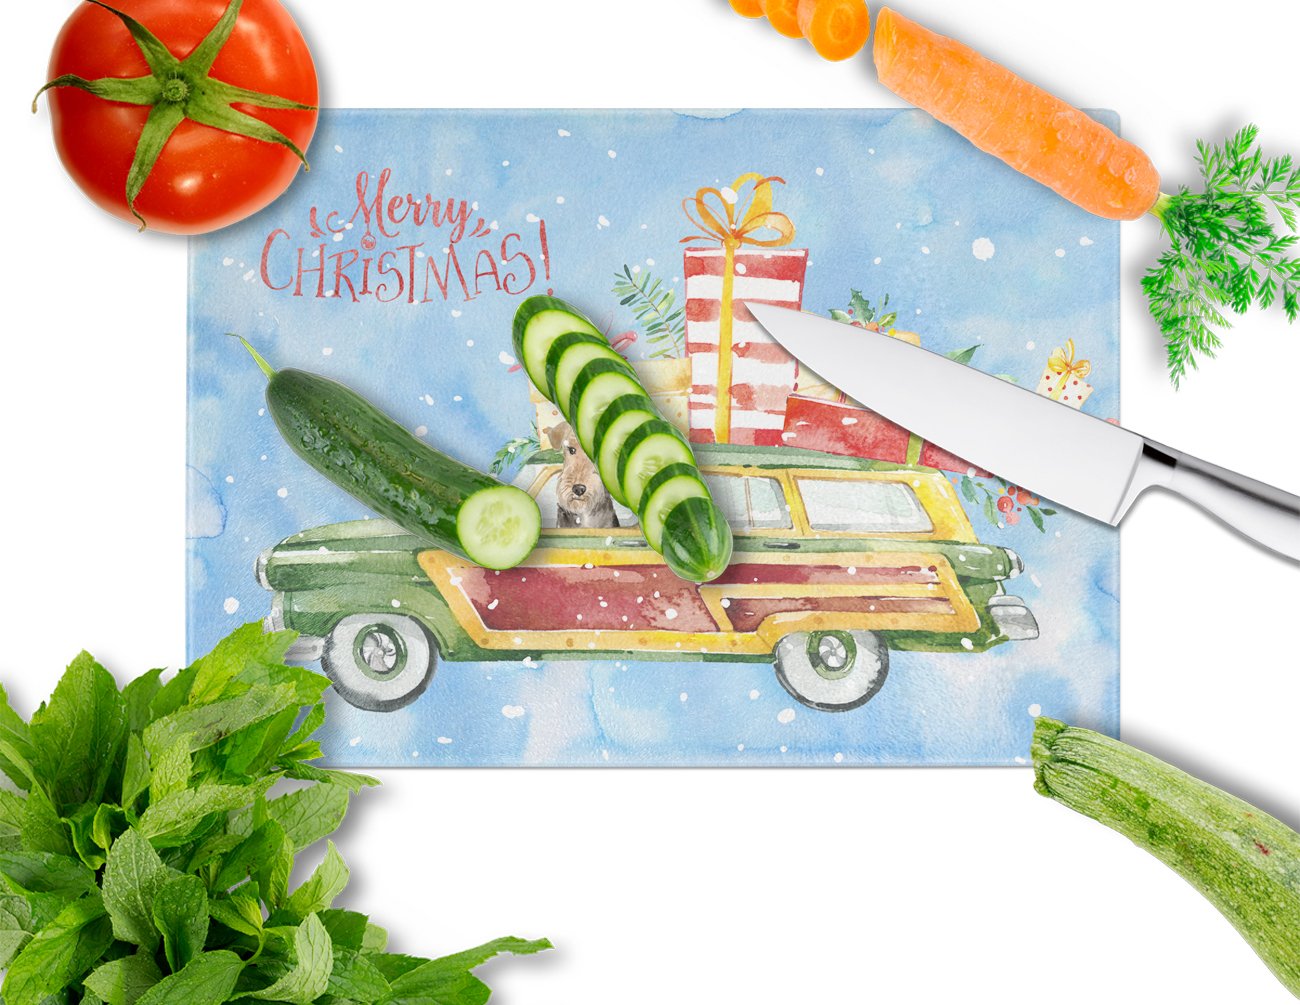 Merry Christmas Welsh Terrier Glass Cutting Board Large CK2427LCB by Caroline's Treasures